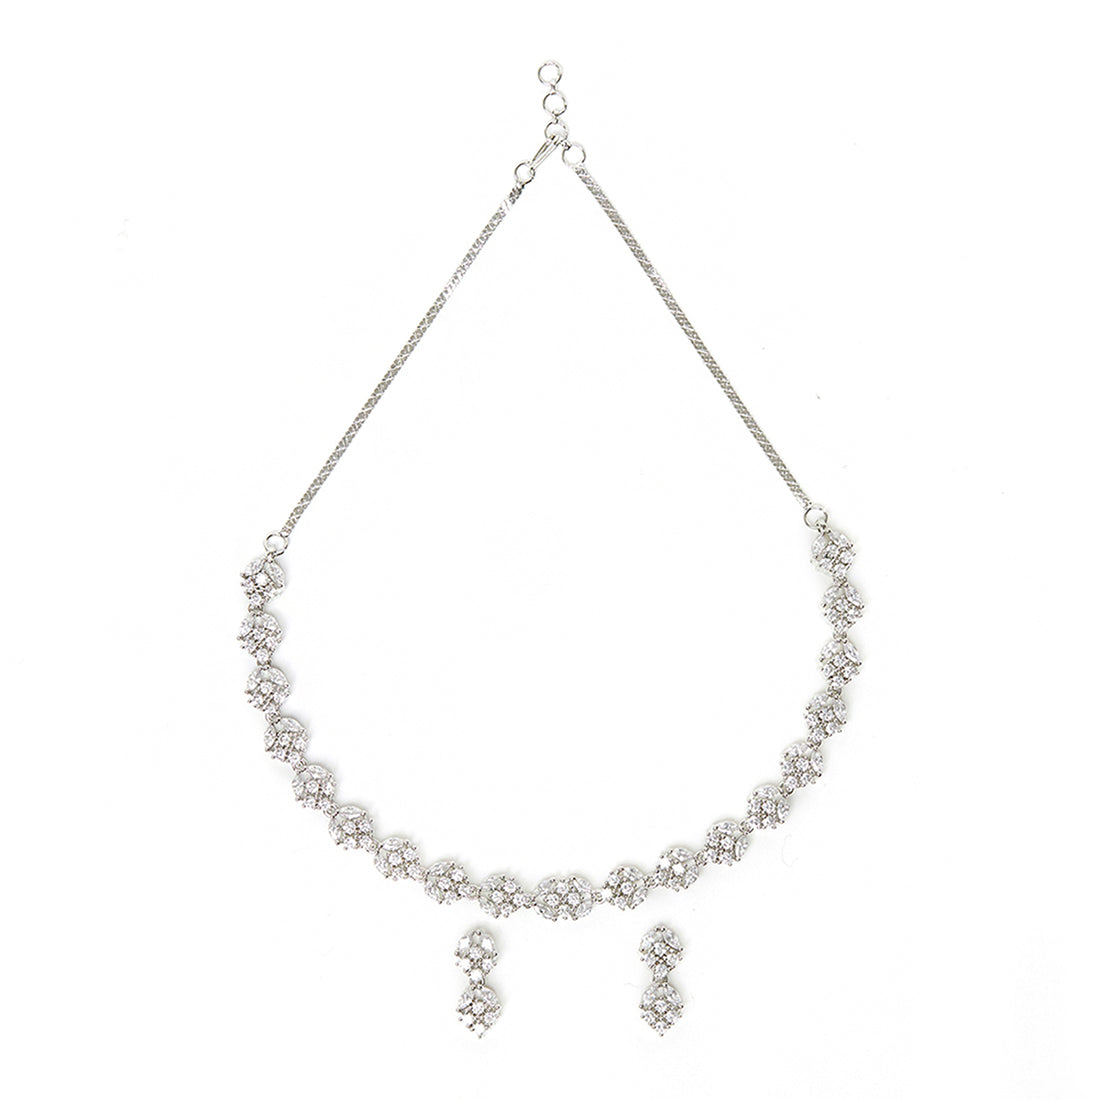 Sparkling Elegance Attractive Necklace Set Studded With CZ